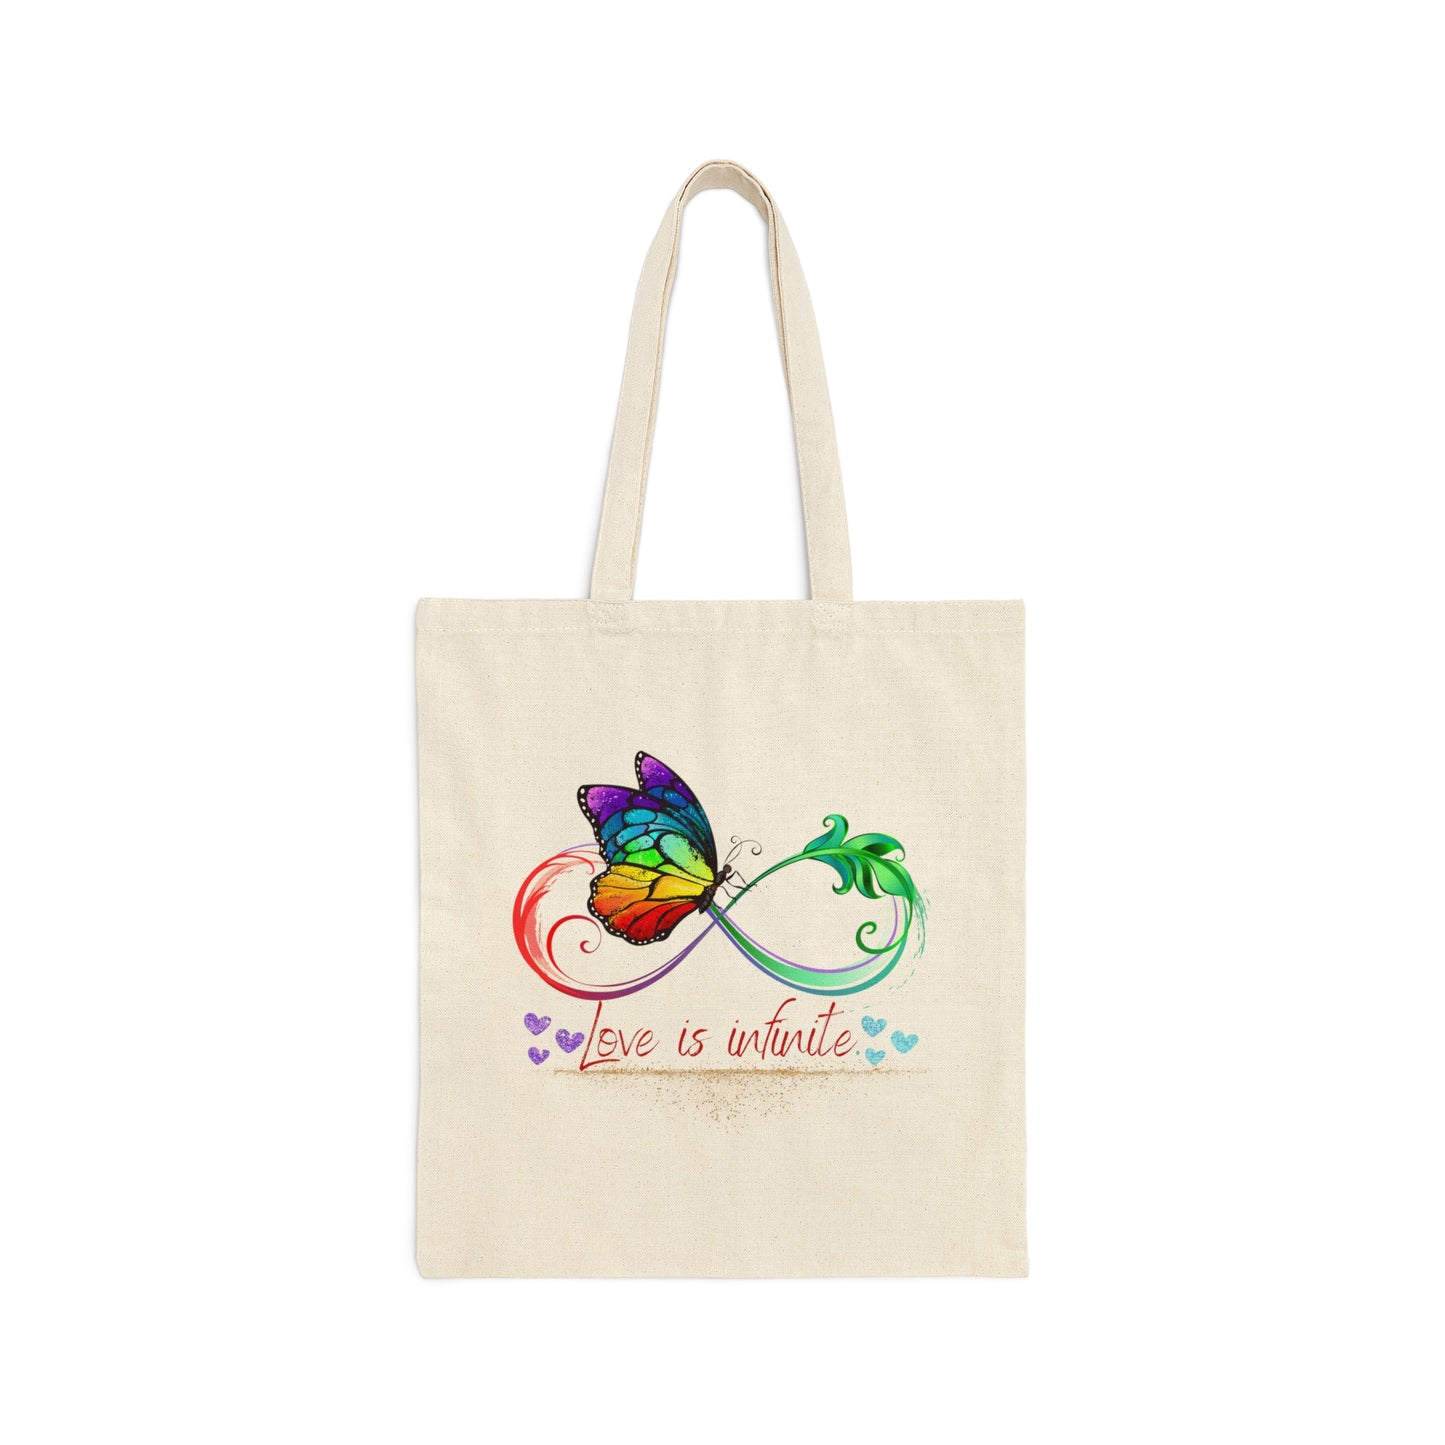 Love is infinite. Not Aggressive. POWERFUL™️ Cotton Canvas Tote Bag